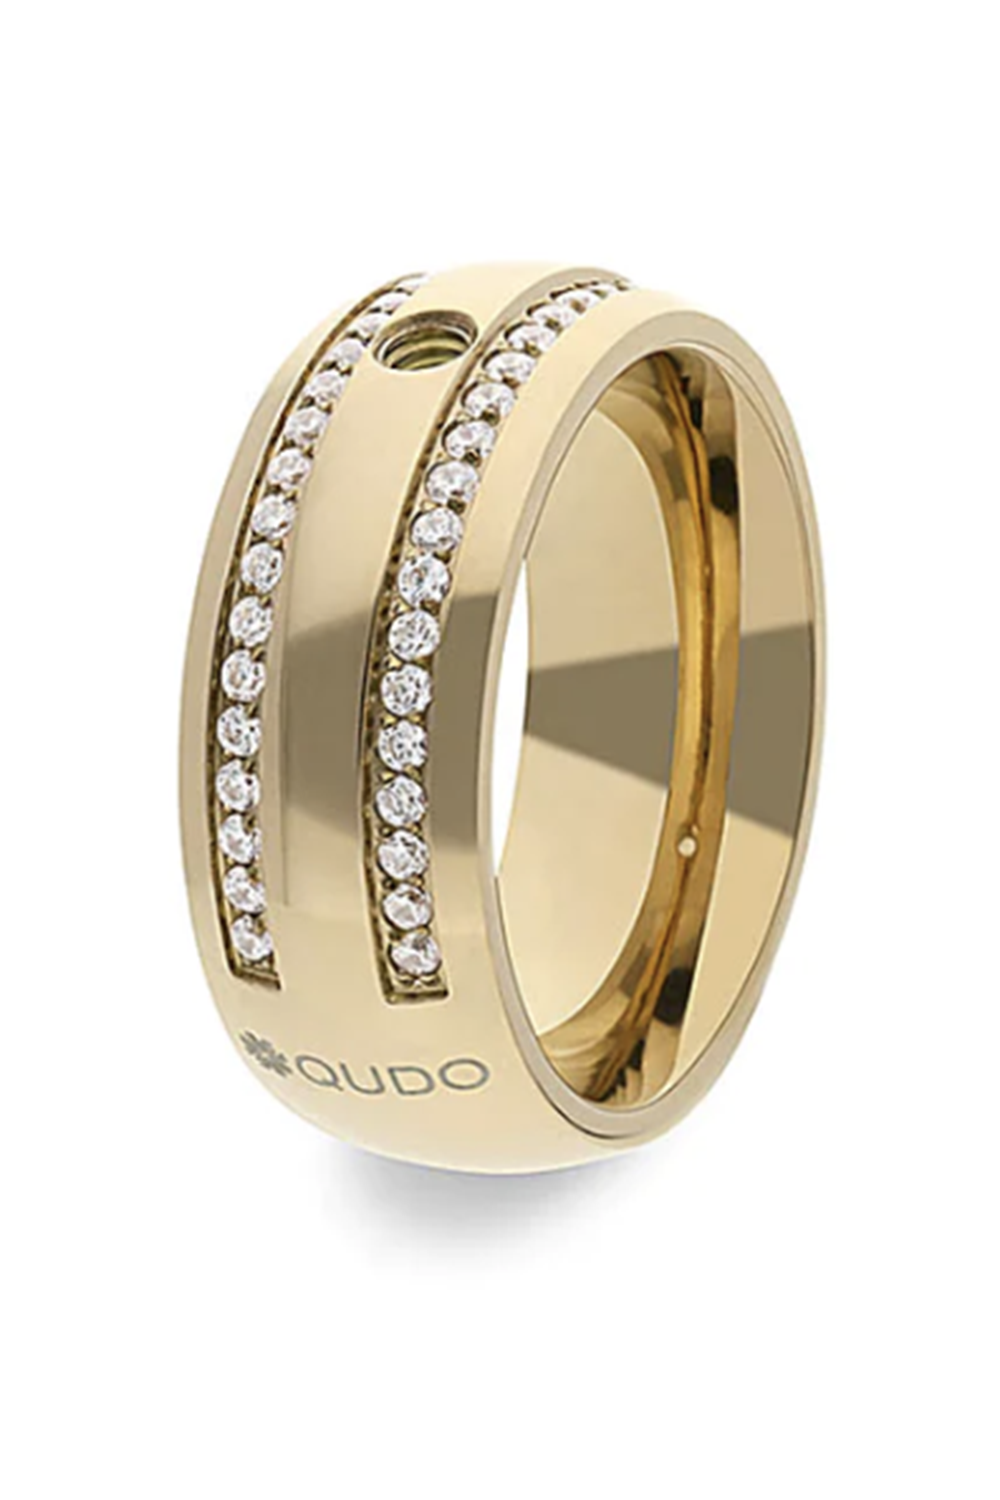 Qudo Interchangeable Ring - Lecce Gold